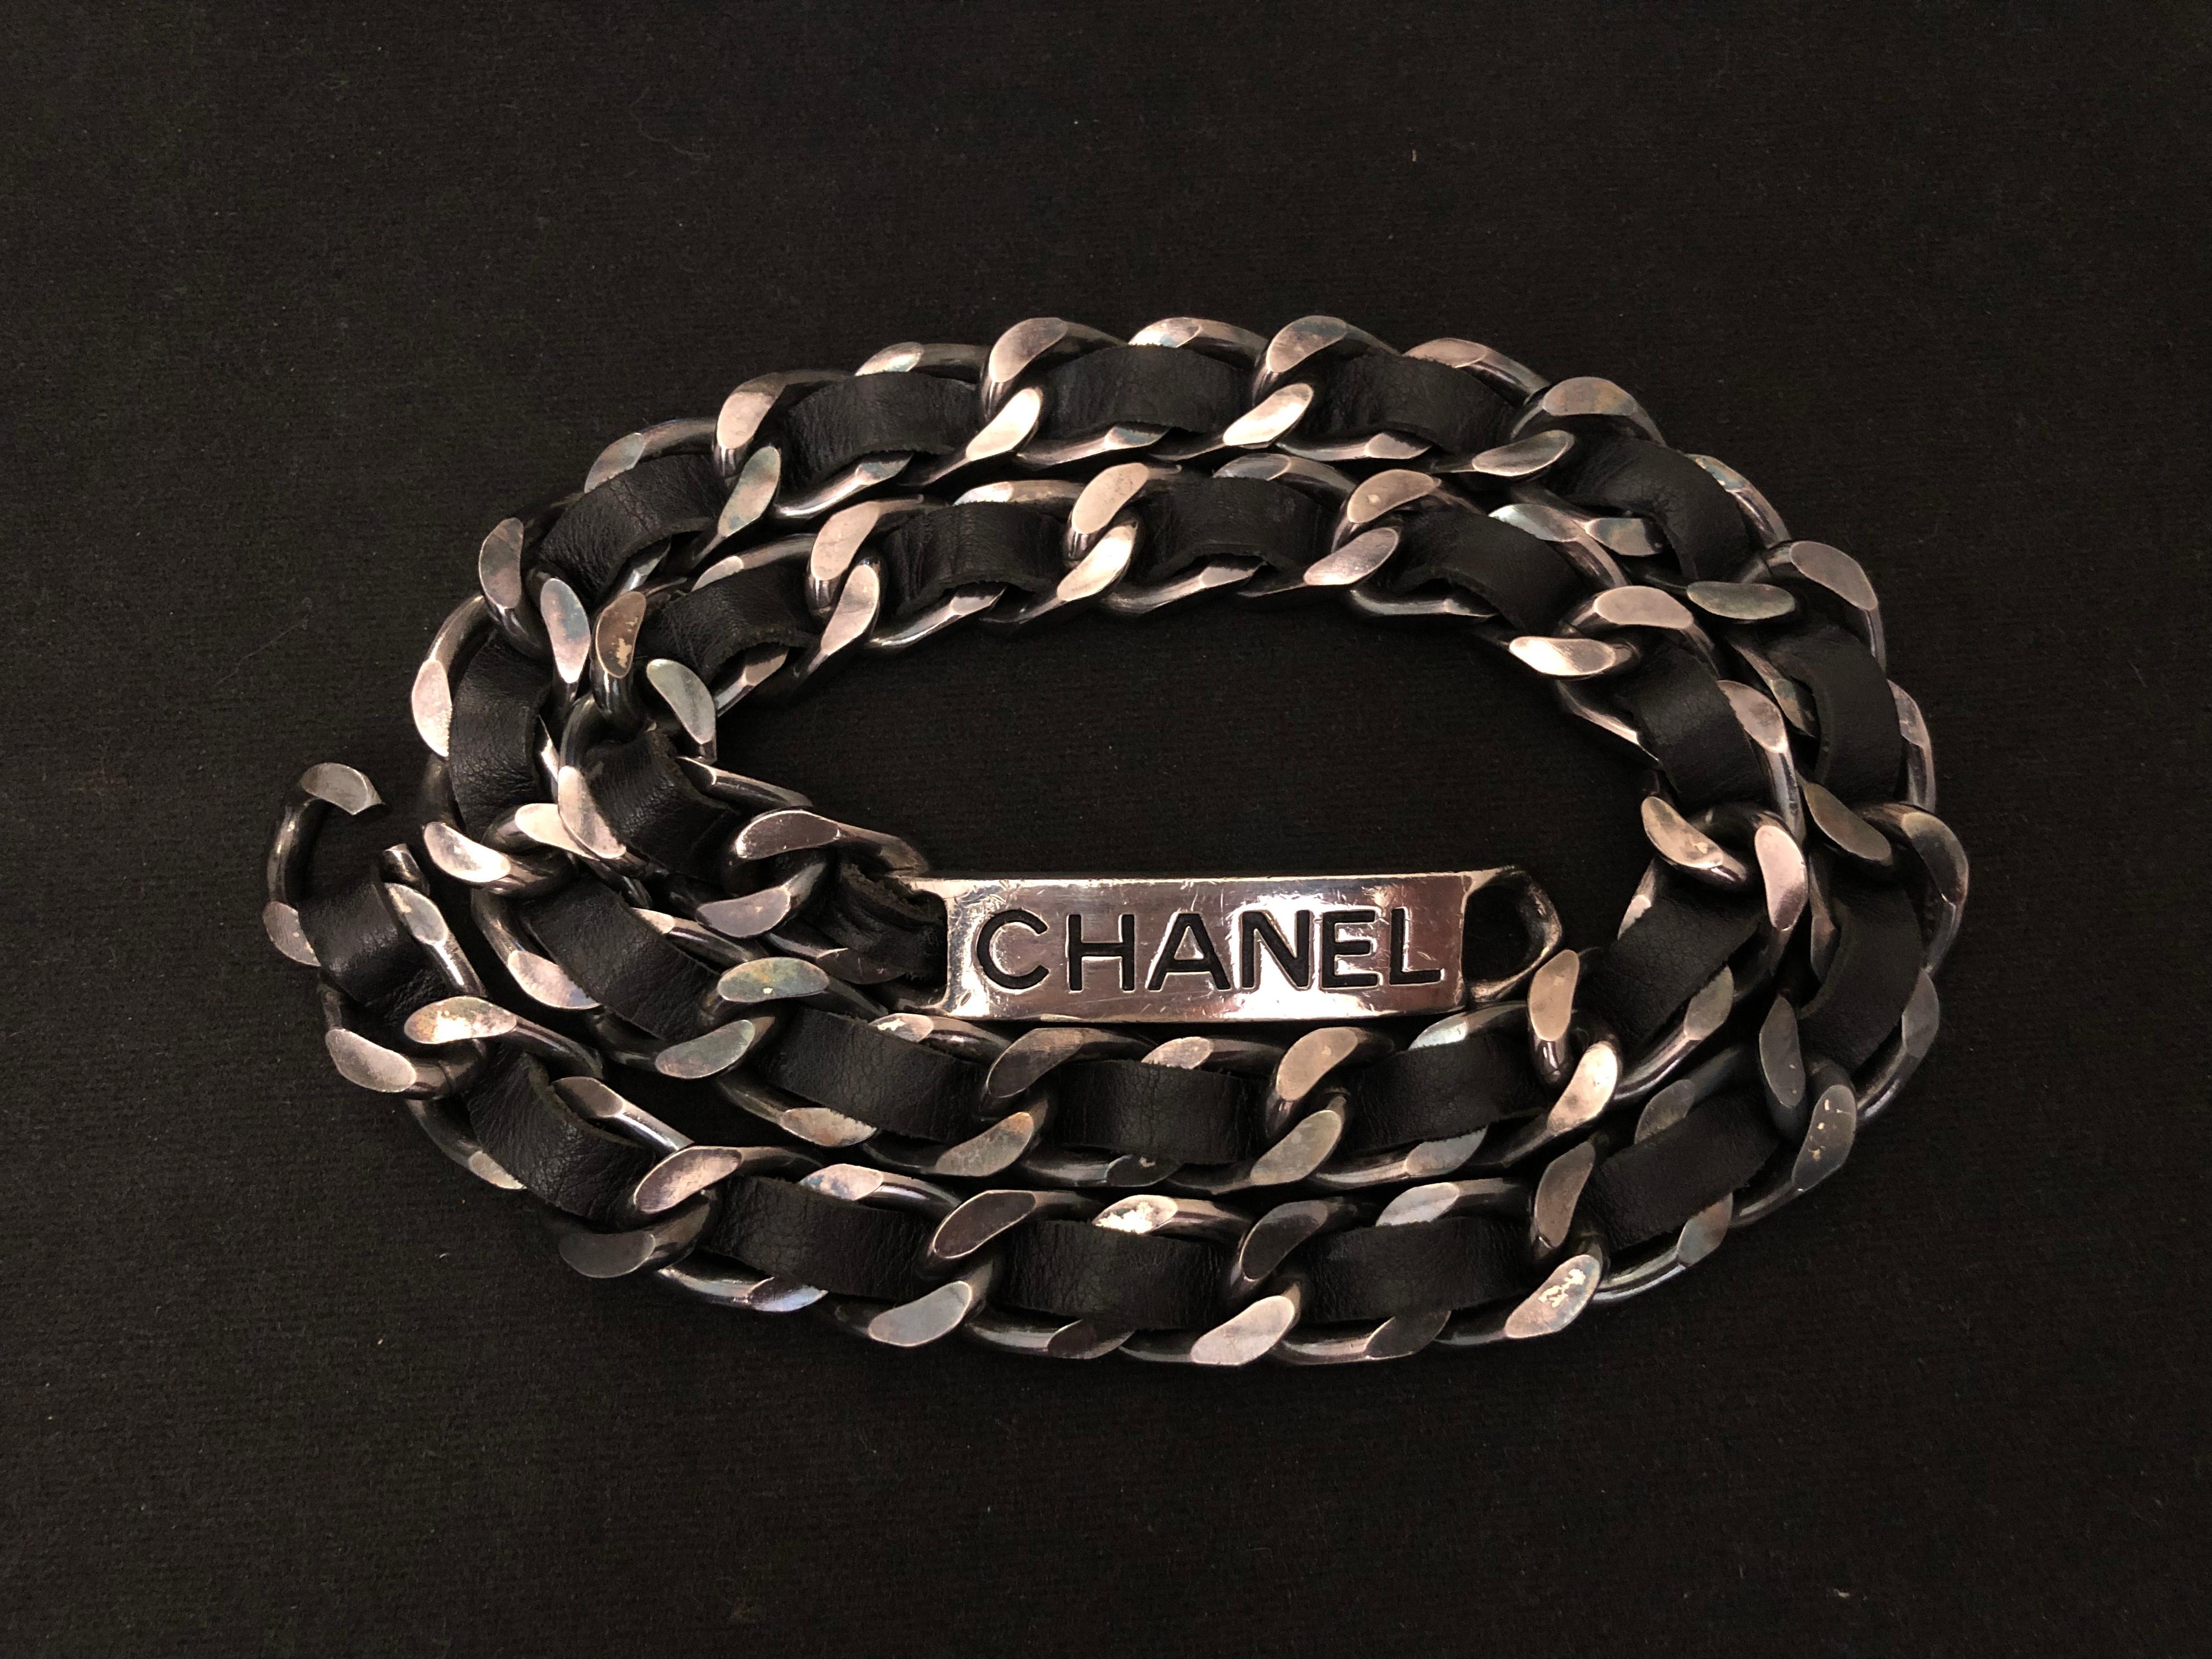 Vintage CHANEL lambskin leather chain belt in black and silver. This rugged and stylish belt is crafted of sturdy silver toned chain link interlaced with black lambskin leather. It features a CHANEL letter plaque on the front. Hook fastening.